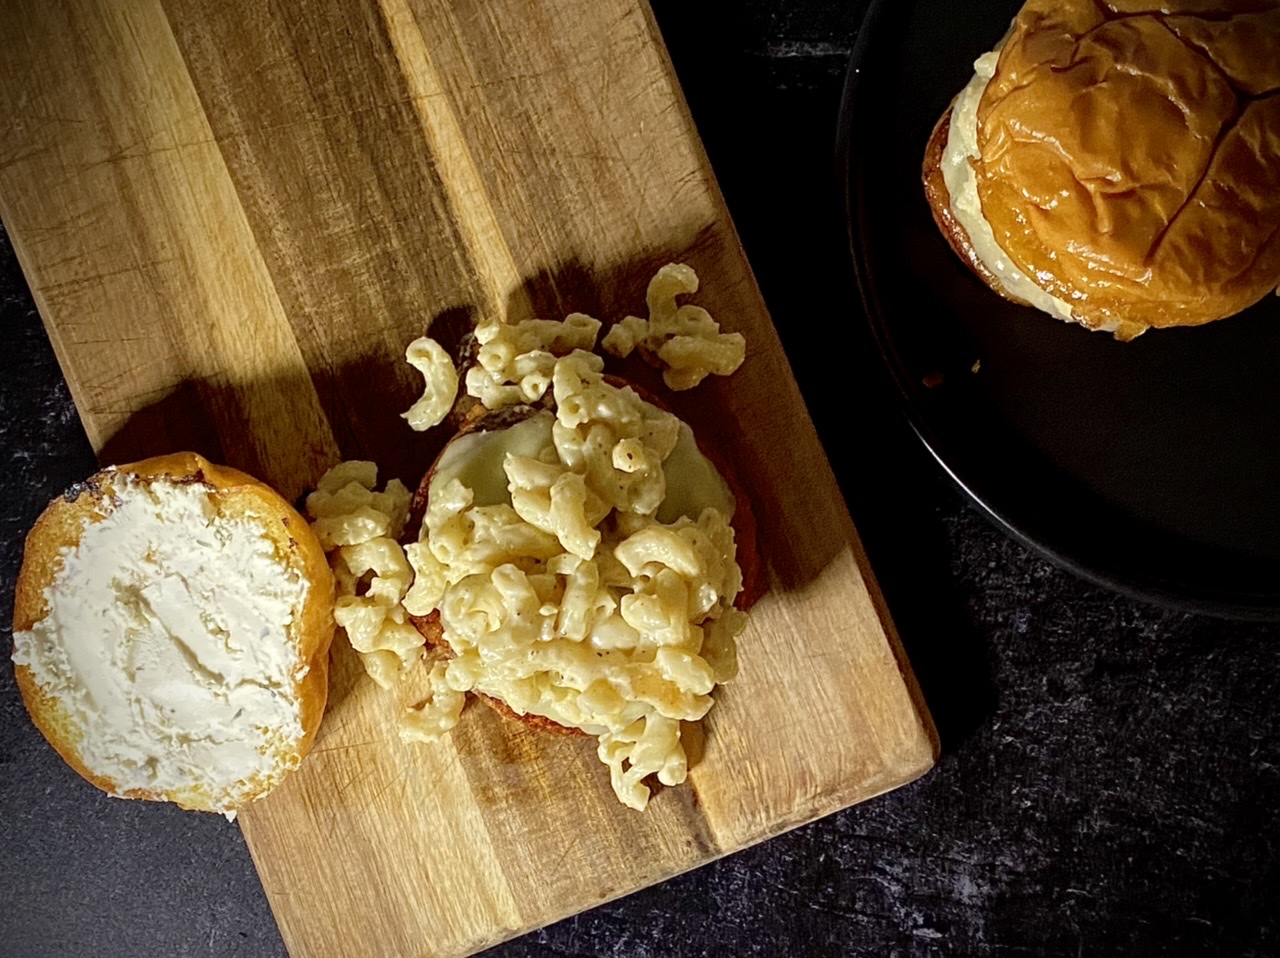 Macaroni and cheese burger on top of a wooden cutting board